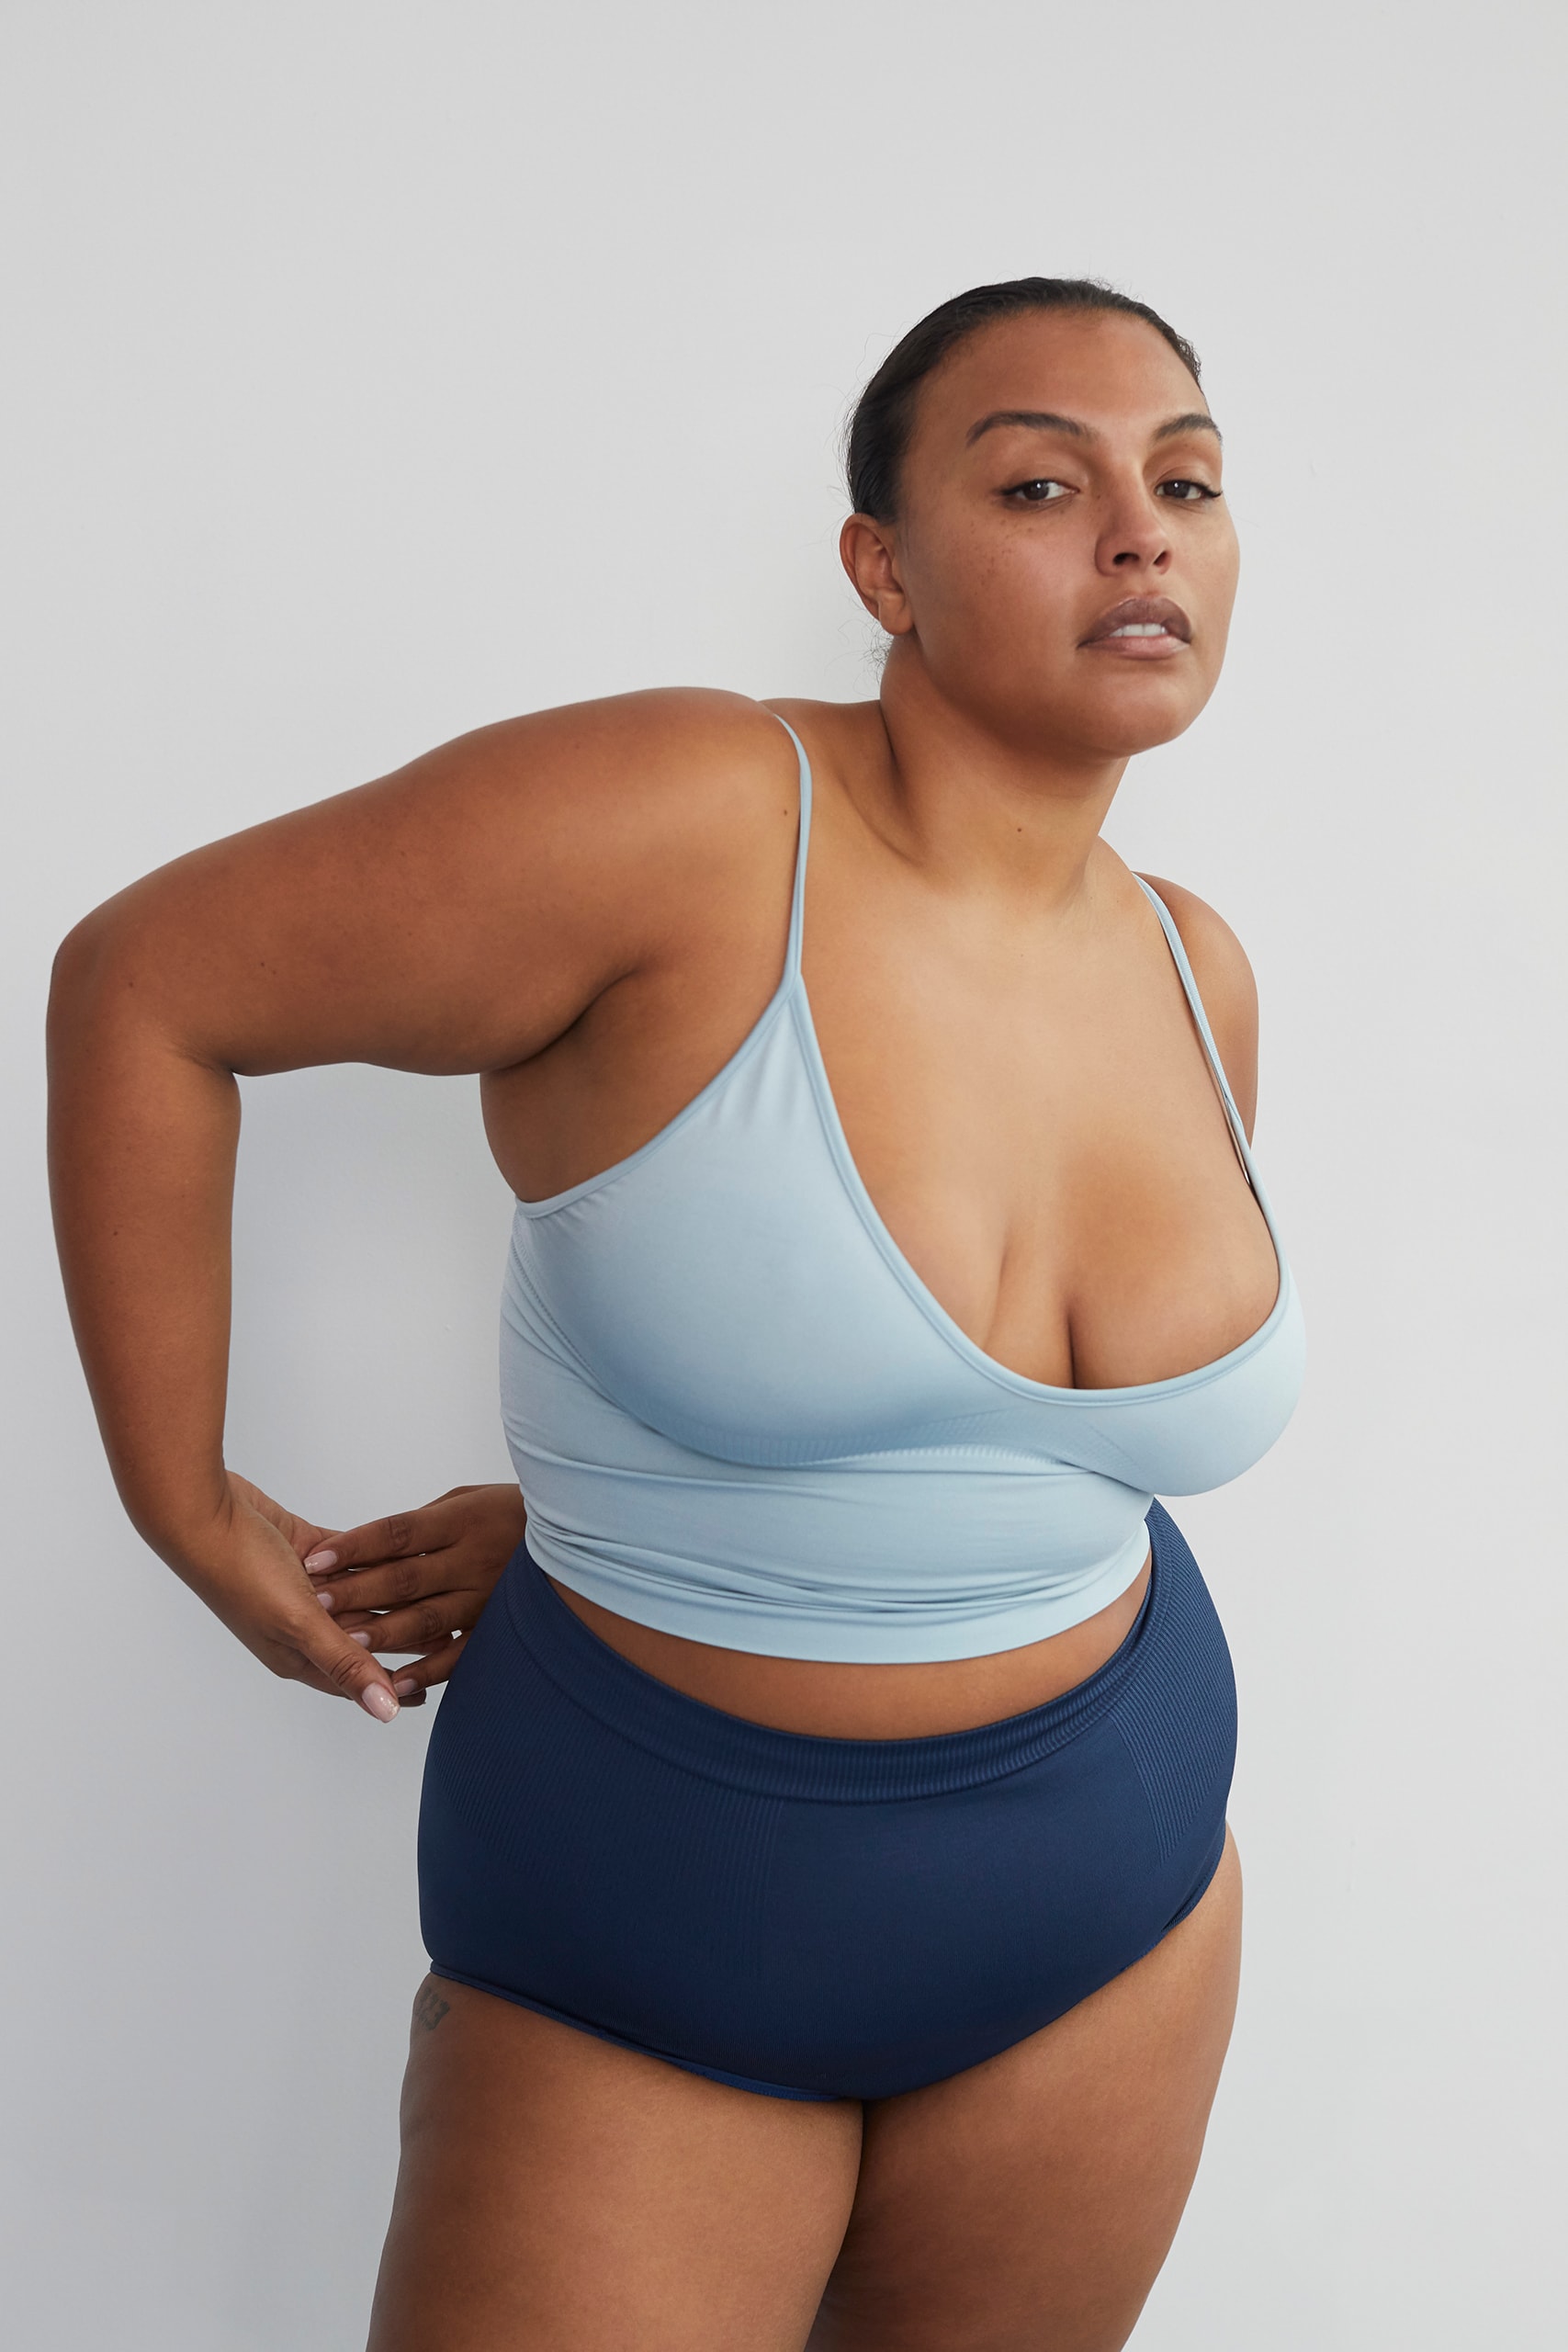 PRISM² Shapewear Swimwear Sportswear Sustainable PRactise New Material Invention Size Inclusive Paloma Elsesser